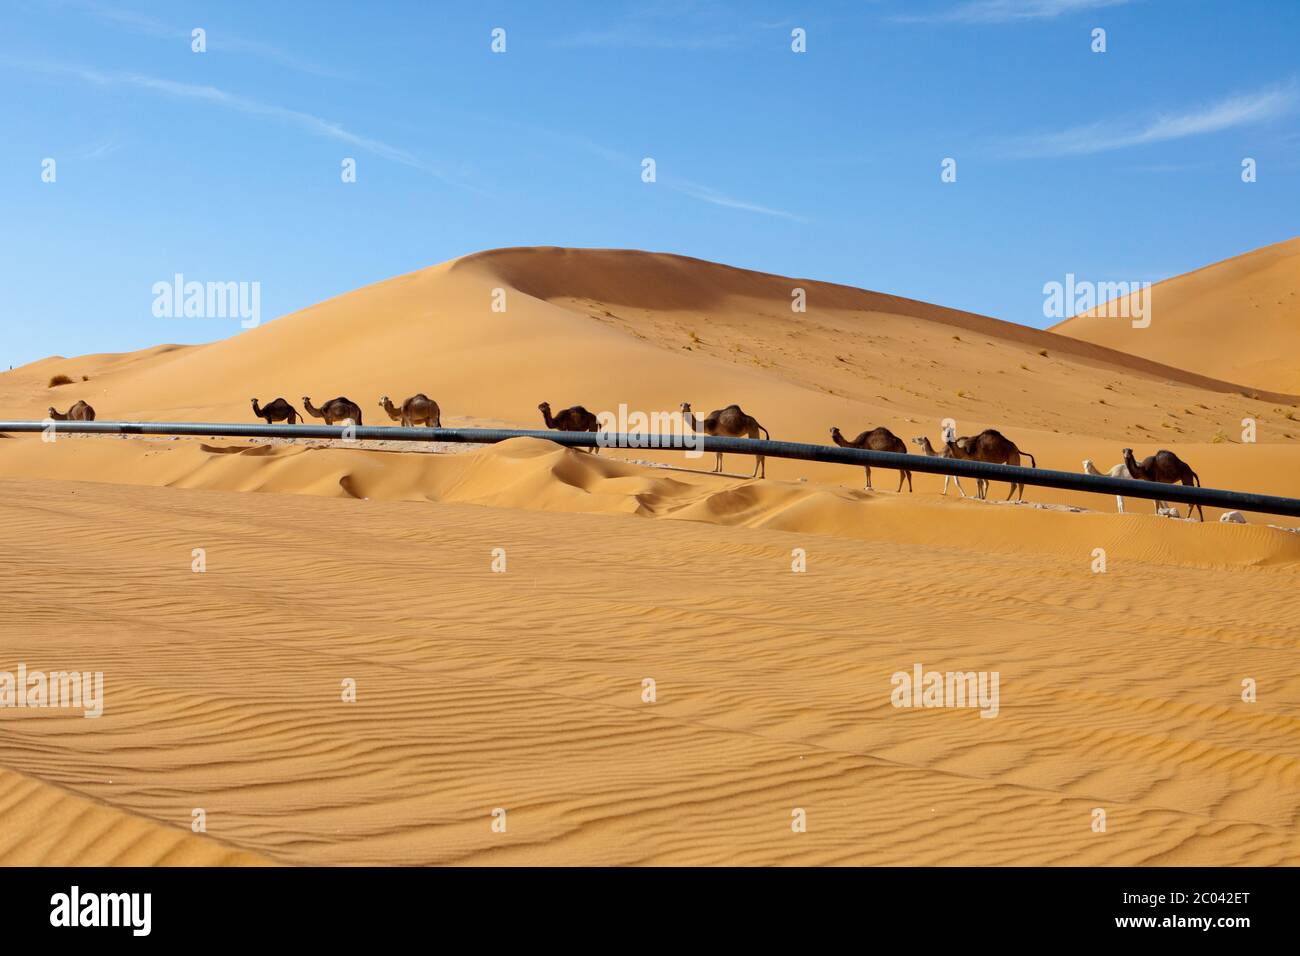 Camels walking on a track built by a oil exploration company beside an oil export pipeline the Sahara desert, North Africa. Stock Photo